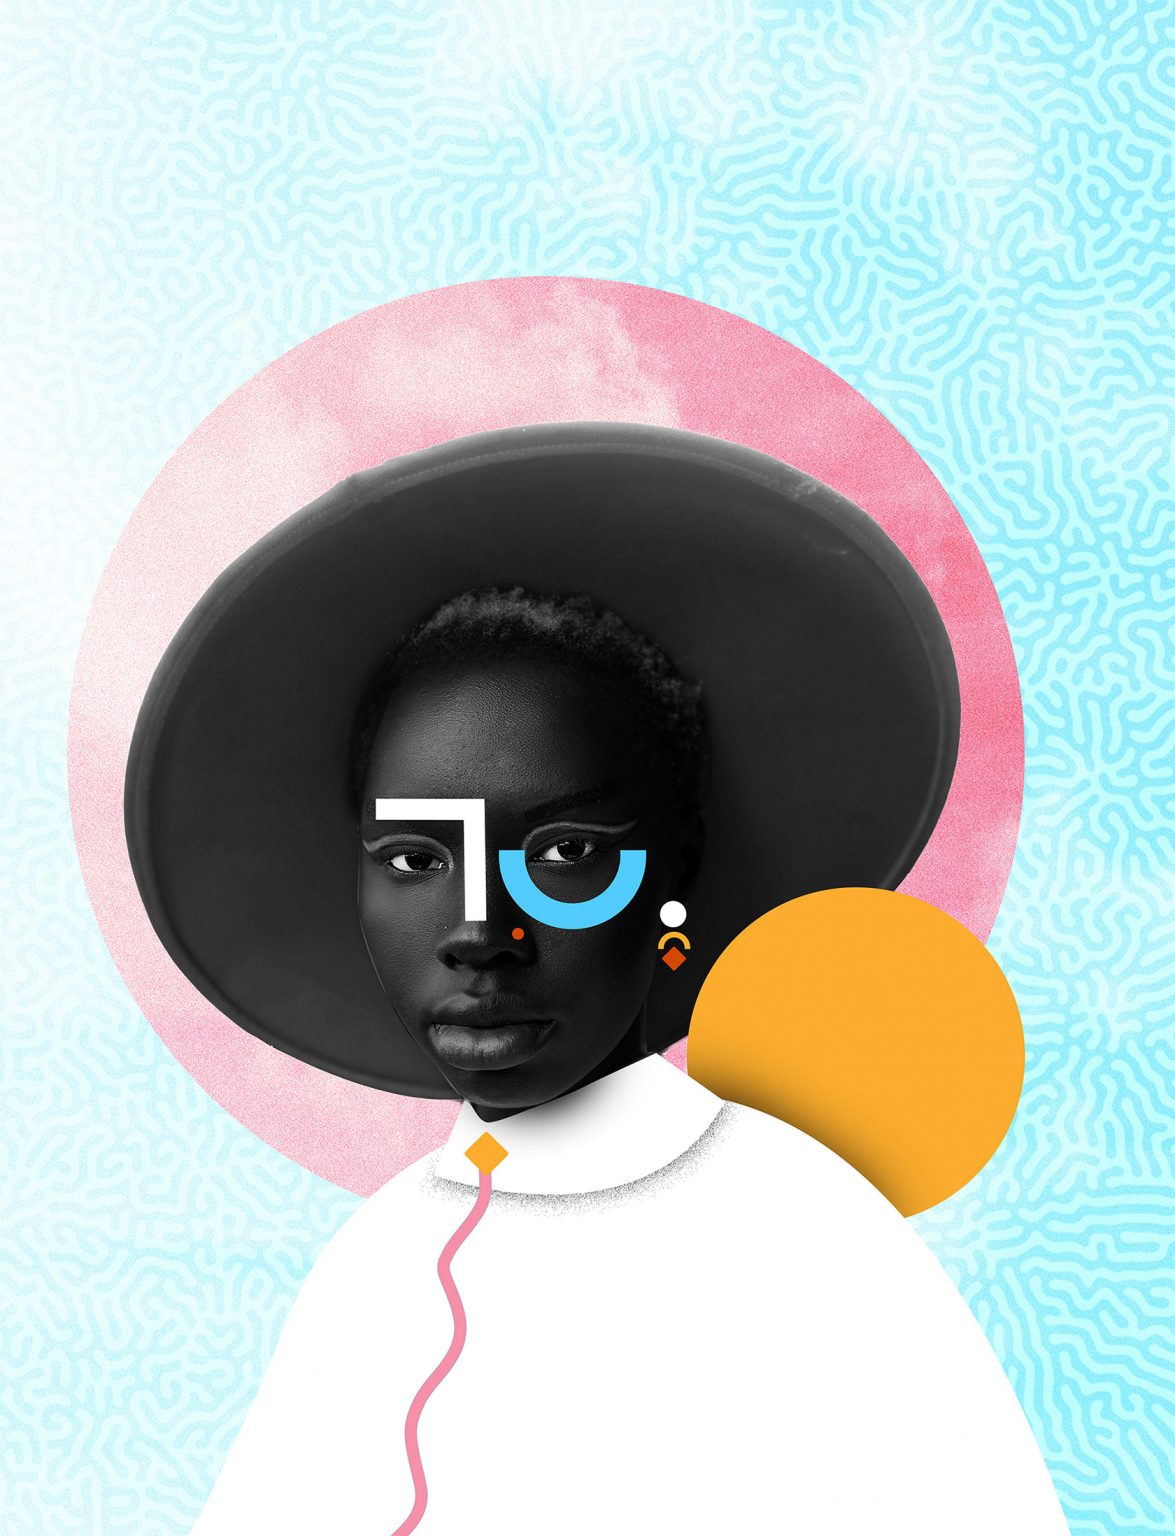 Awesome Collages by Temi Coker | Daily design inspiration for creatives ...